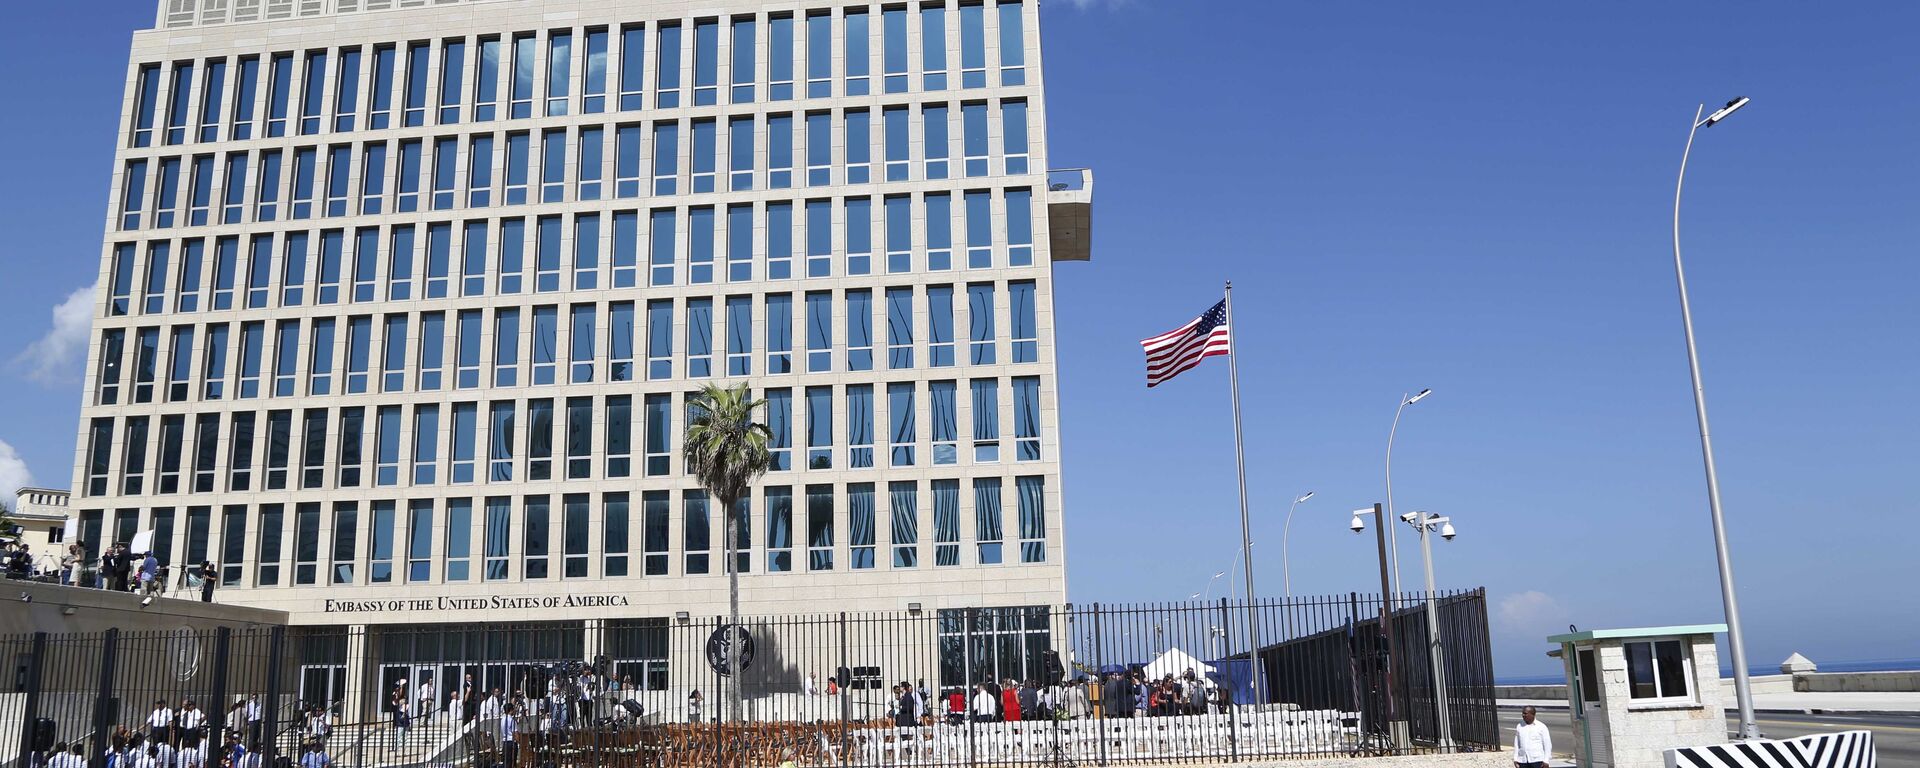 The United States flag flies at the newly-opened embassy in Havana, Cuba. (File) - Sputnik International, 1920, 03.02.2022